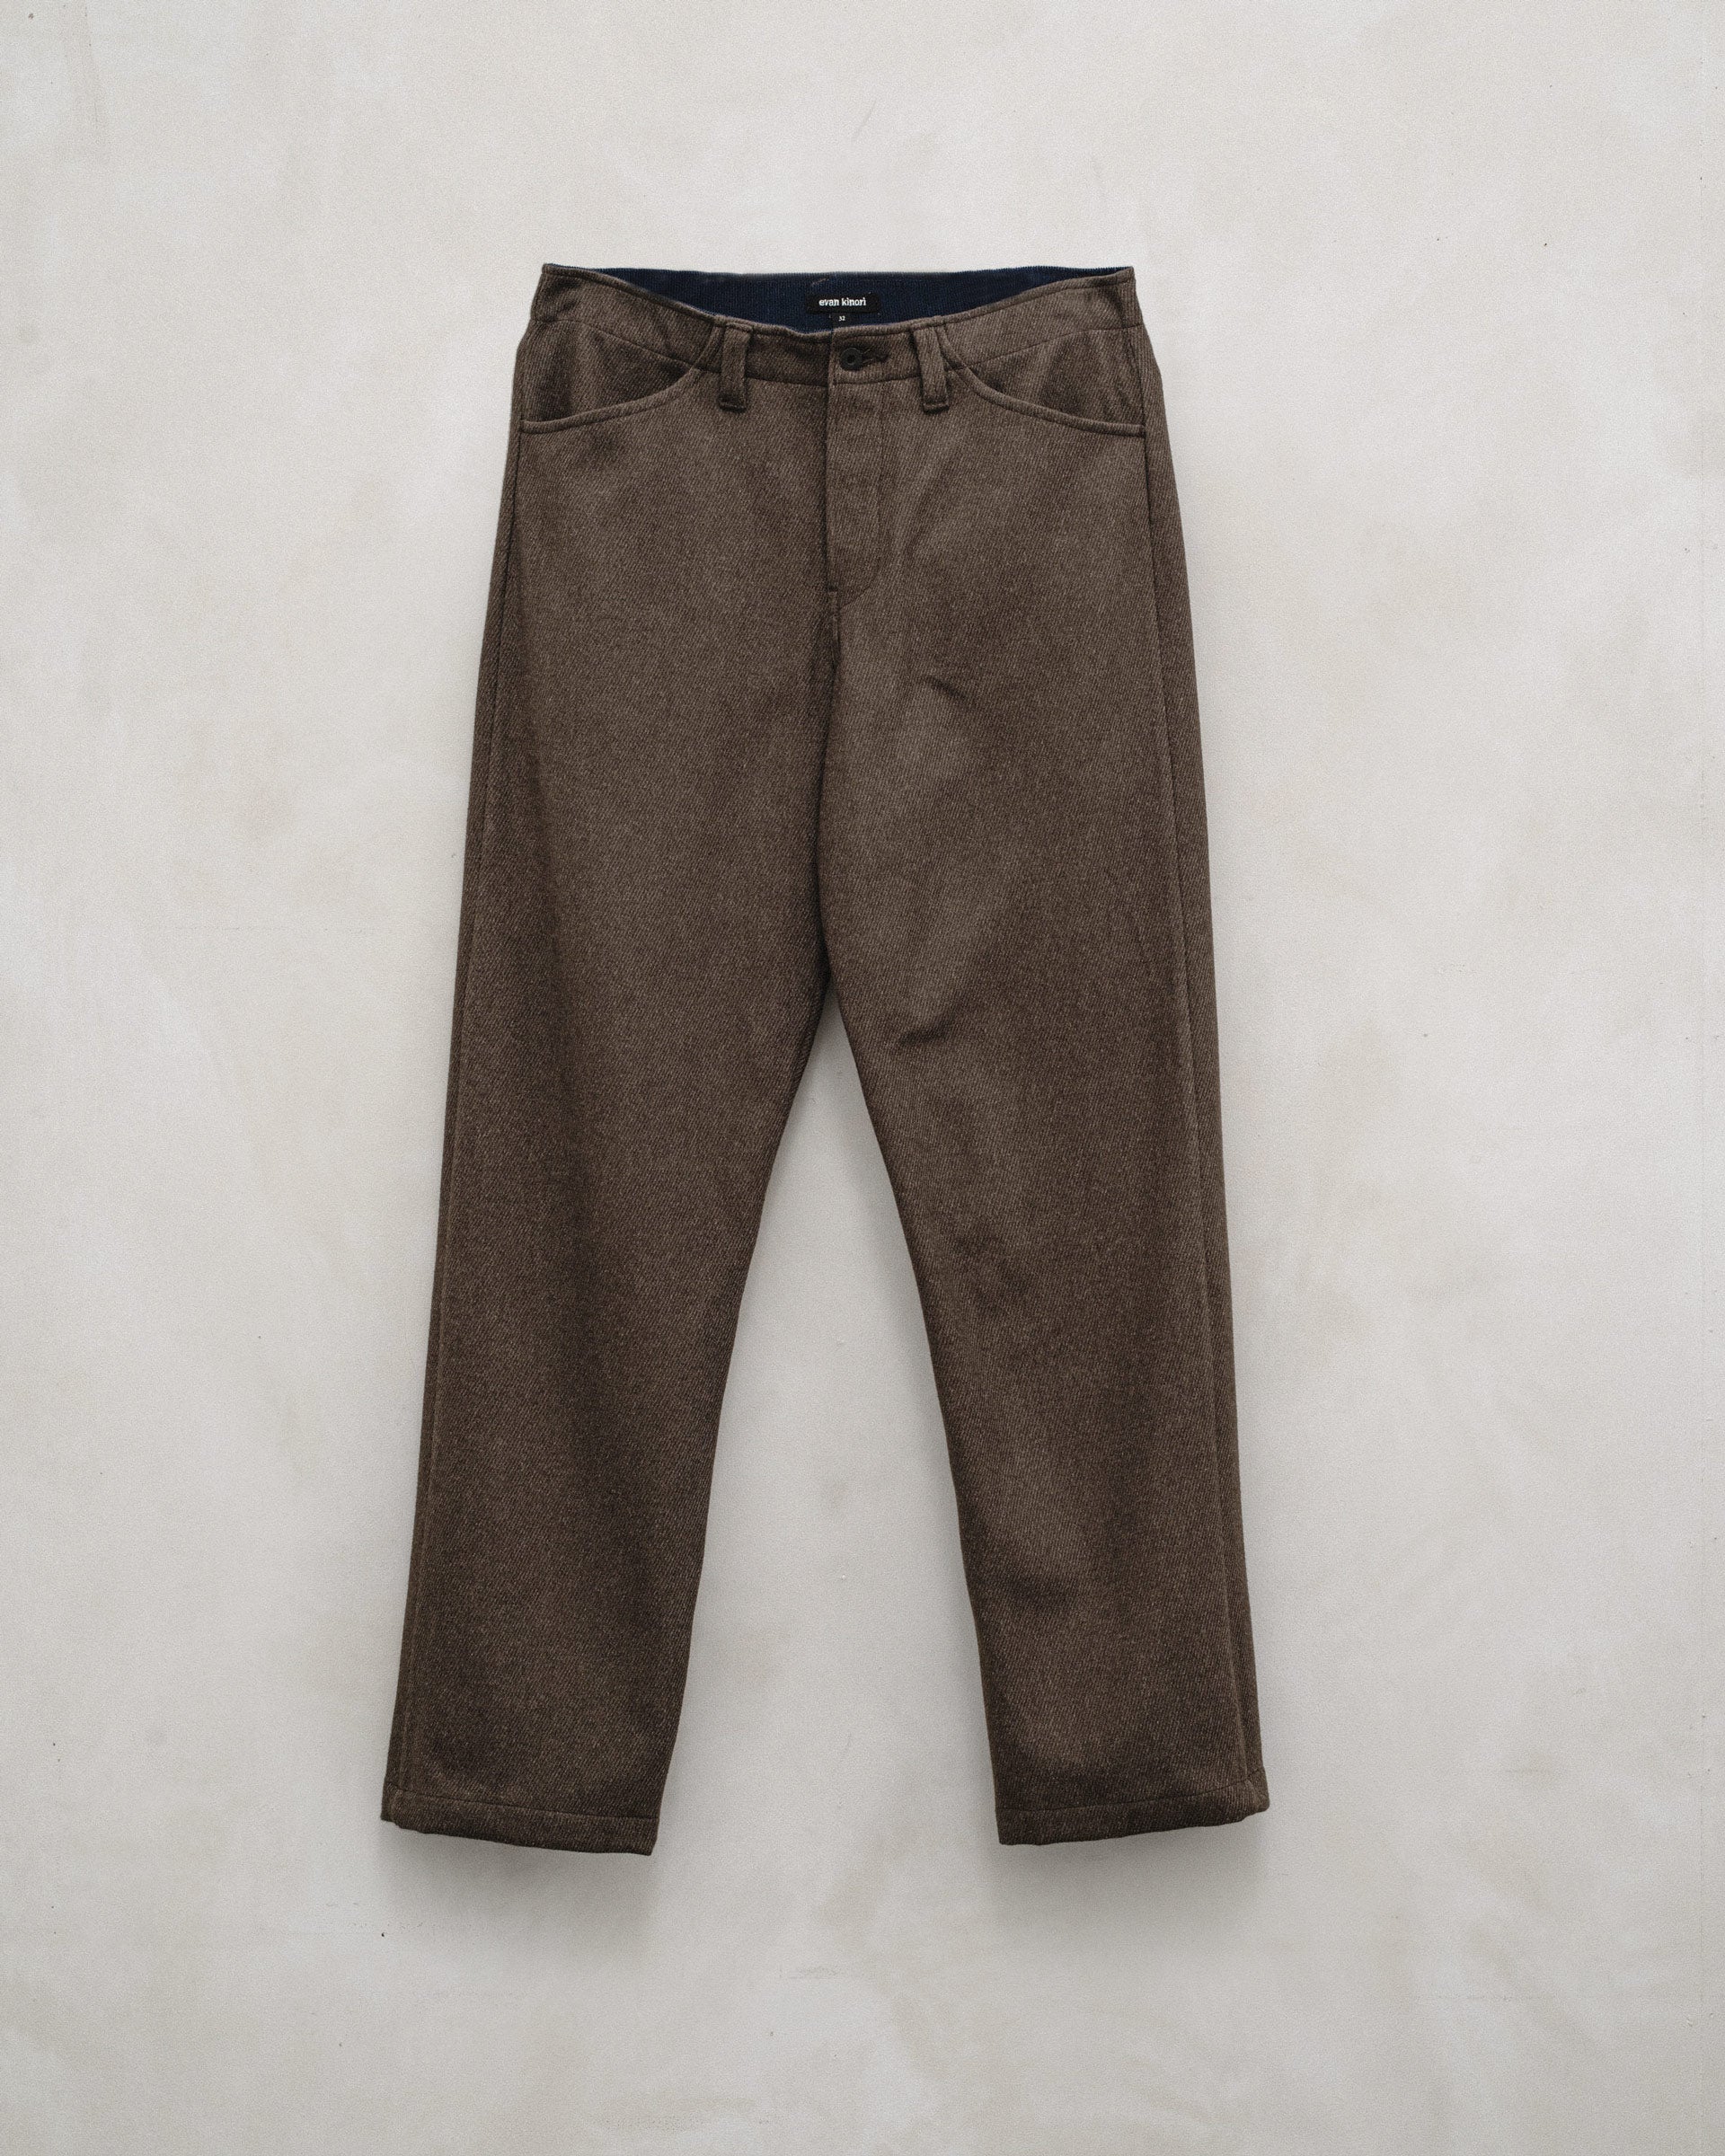 Tan Cavalry Twill Trousers, Men's Country Clothing